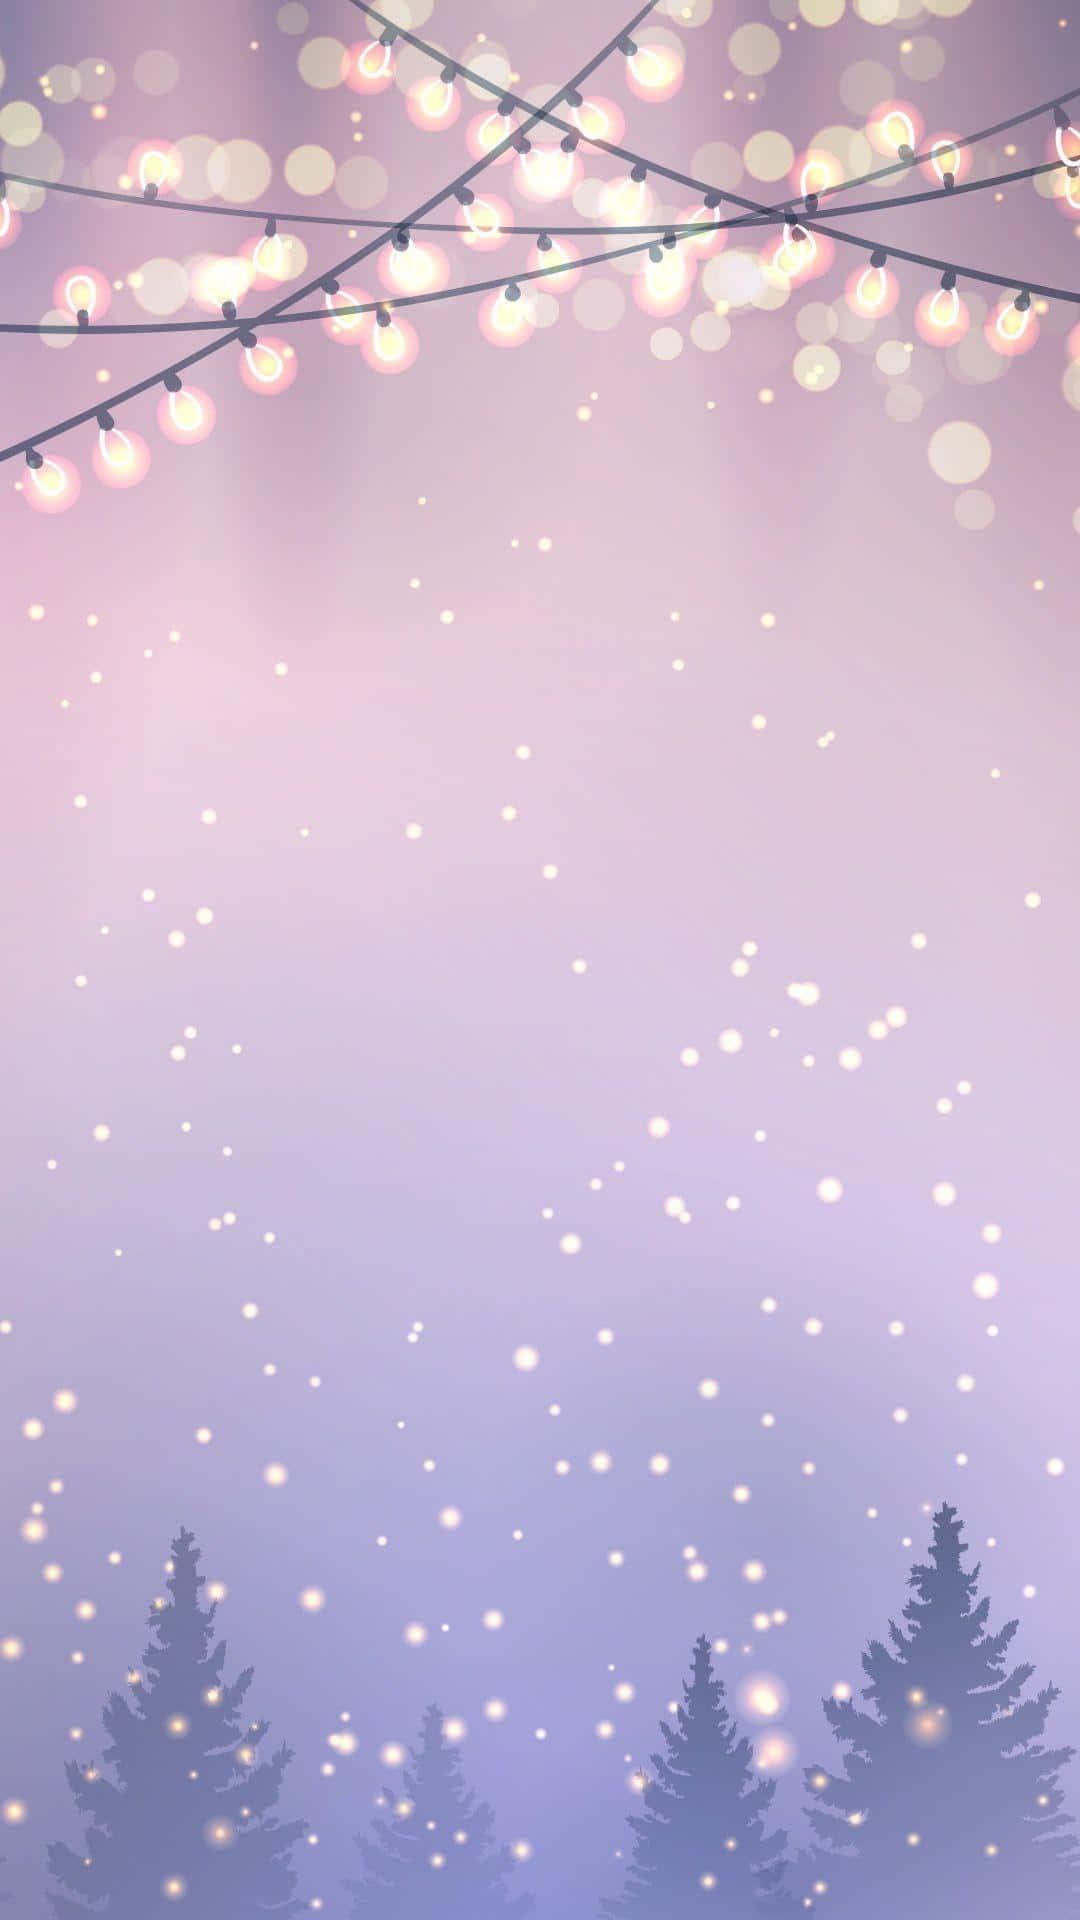 Christmas Lights Background With Trees And Snow Wallpaper